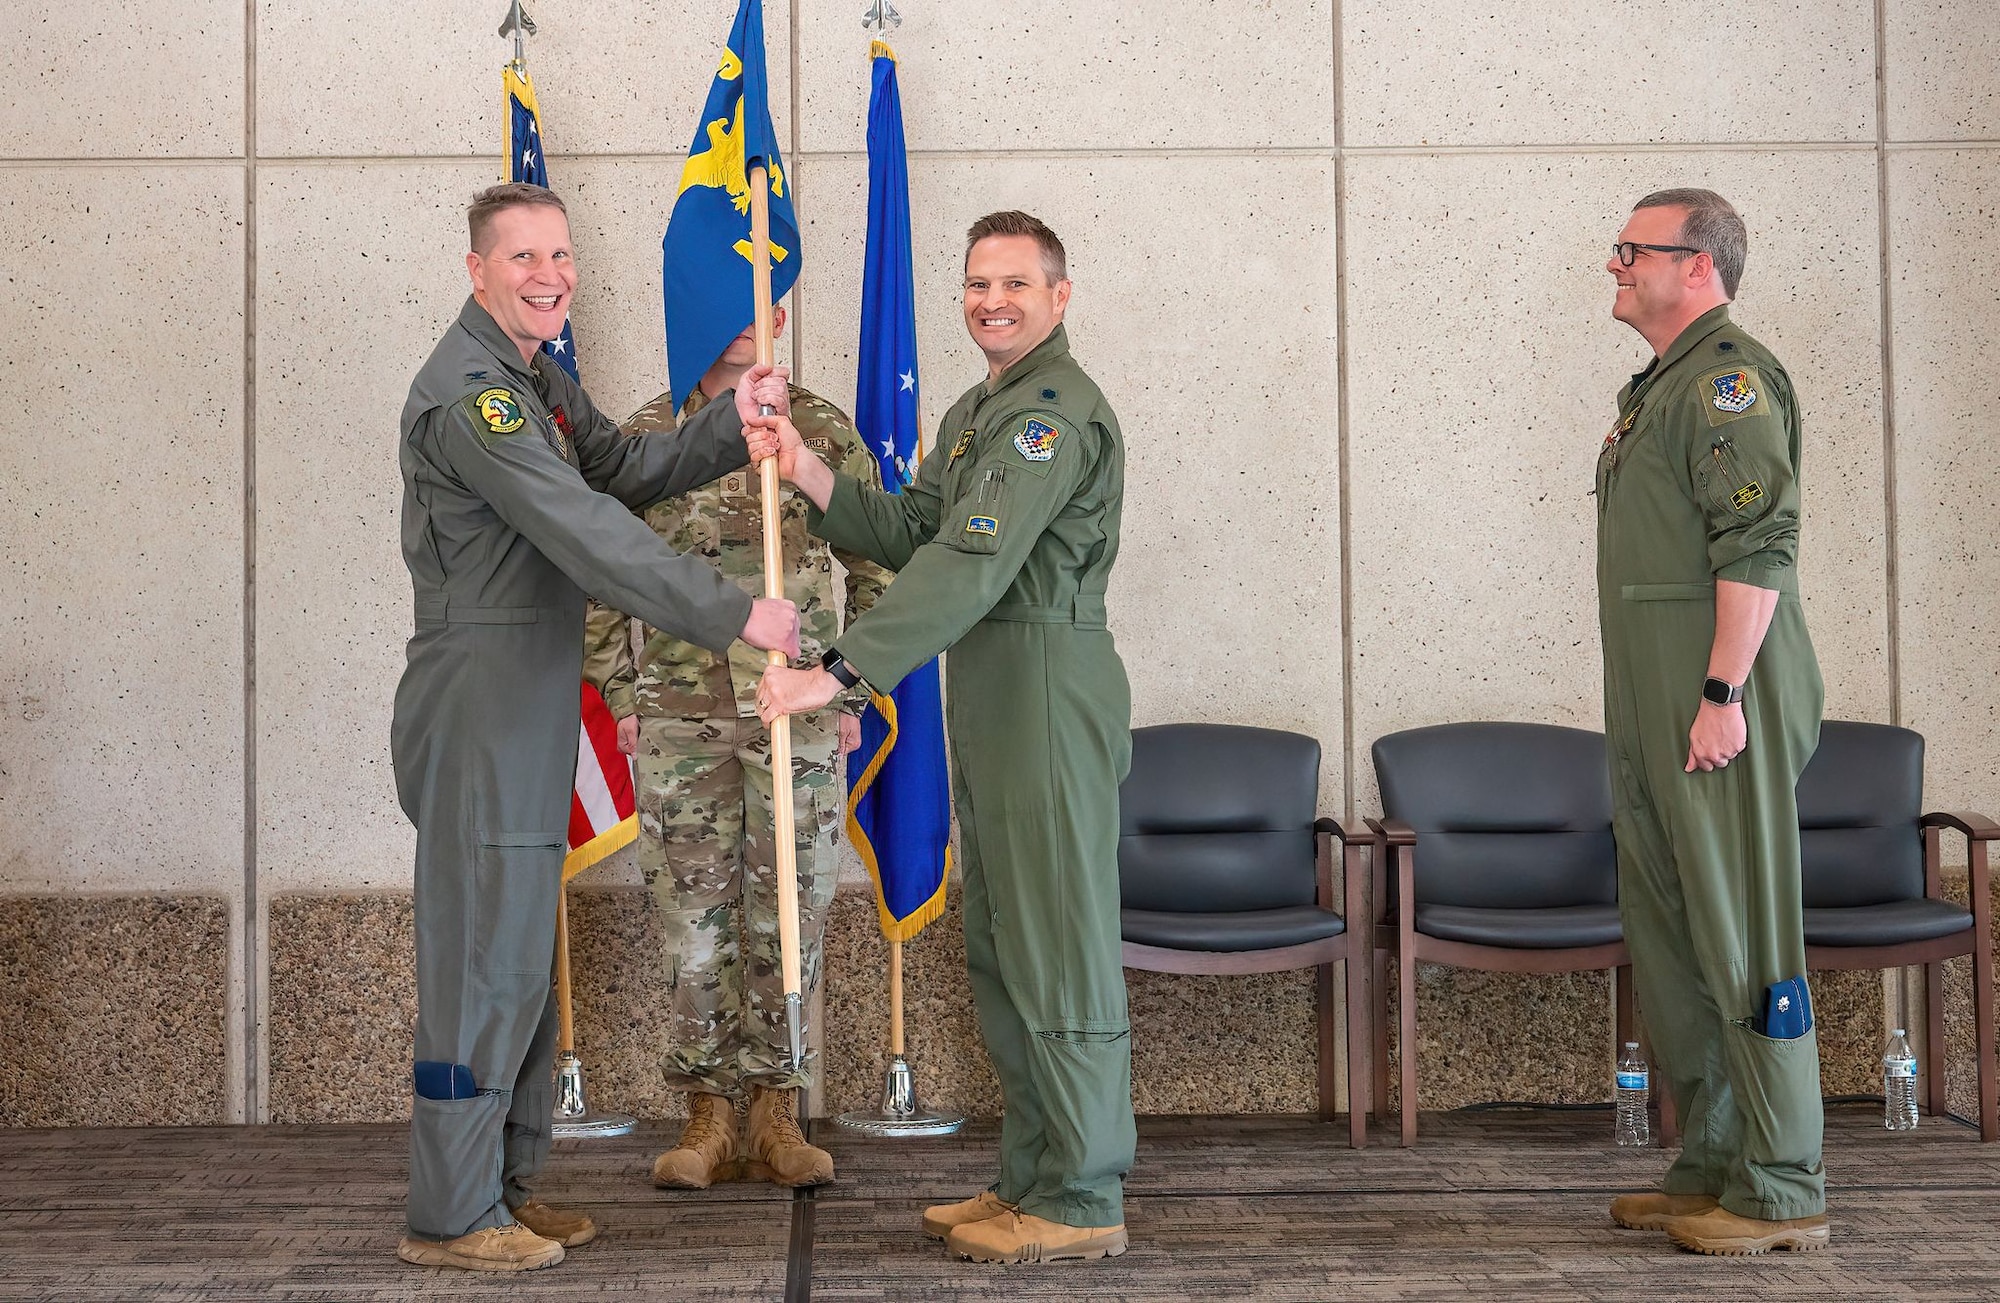 A Change of Command was held for the 419th Medical Squadron at Hill Air Force Base on June 4, 2023